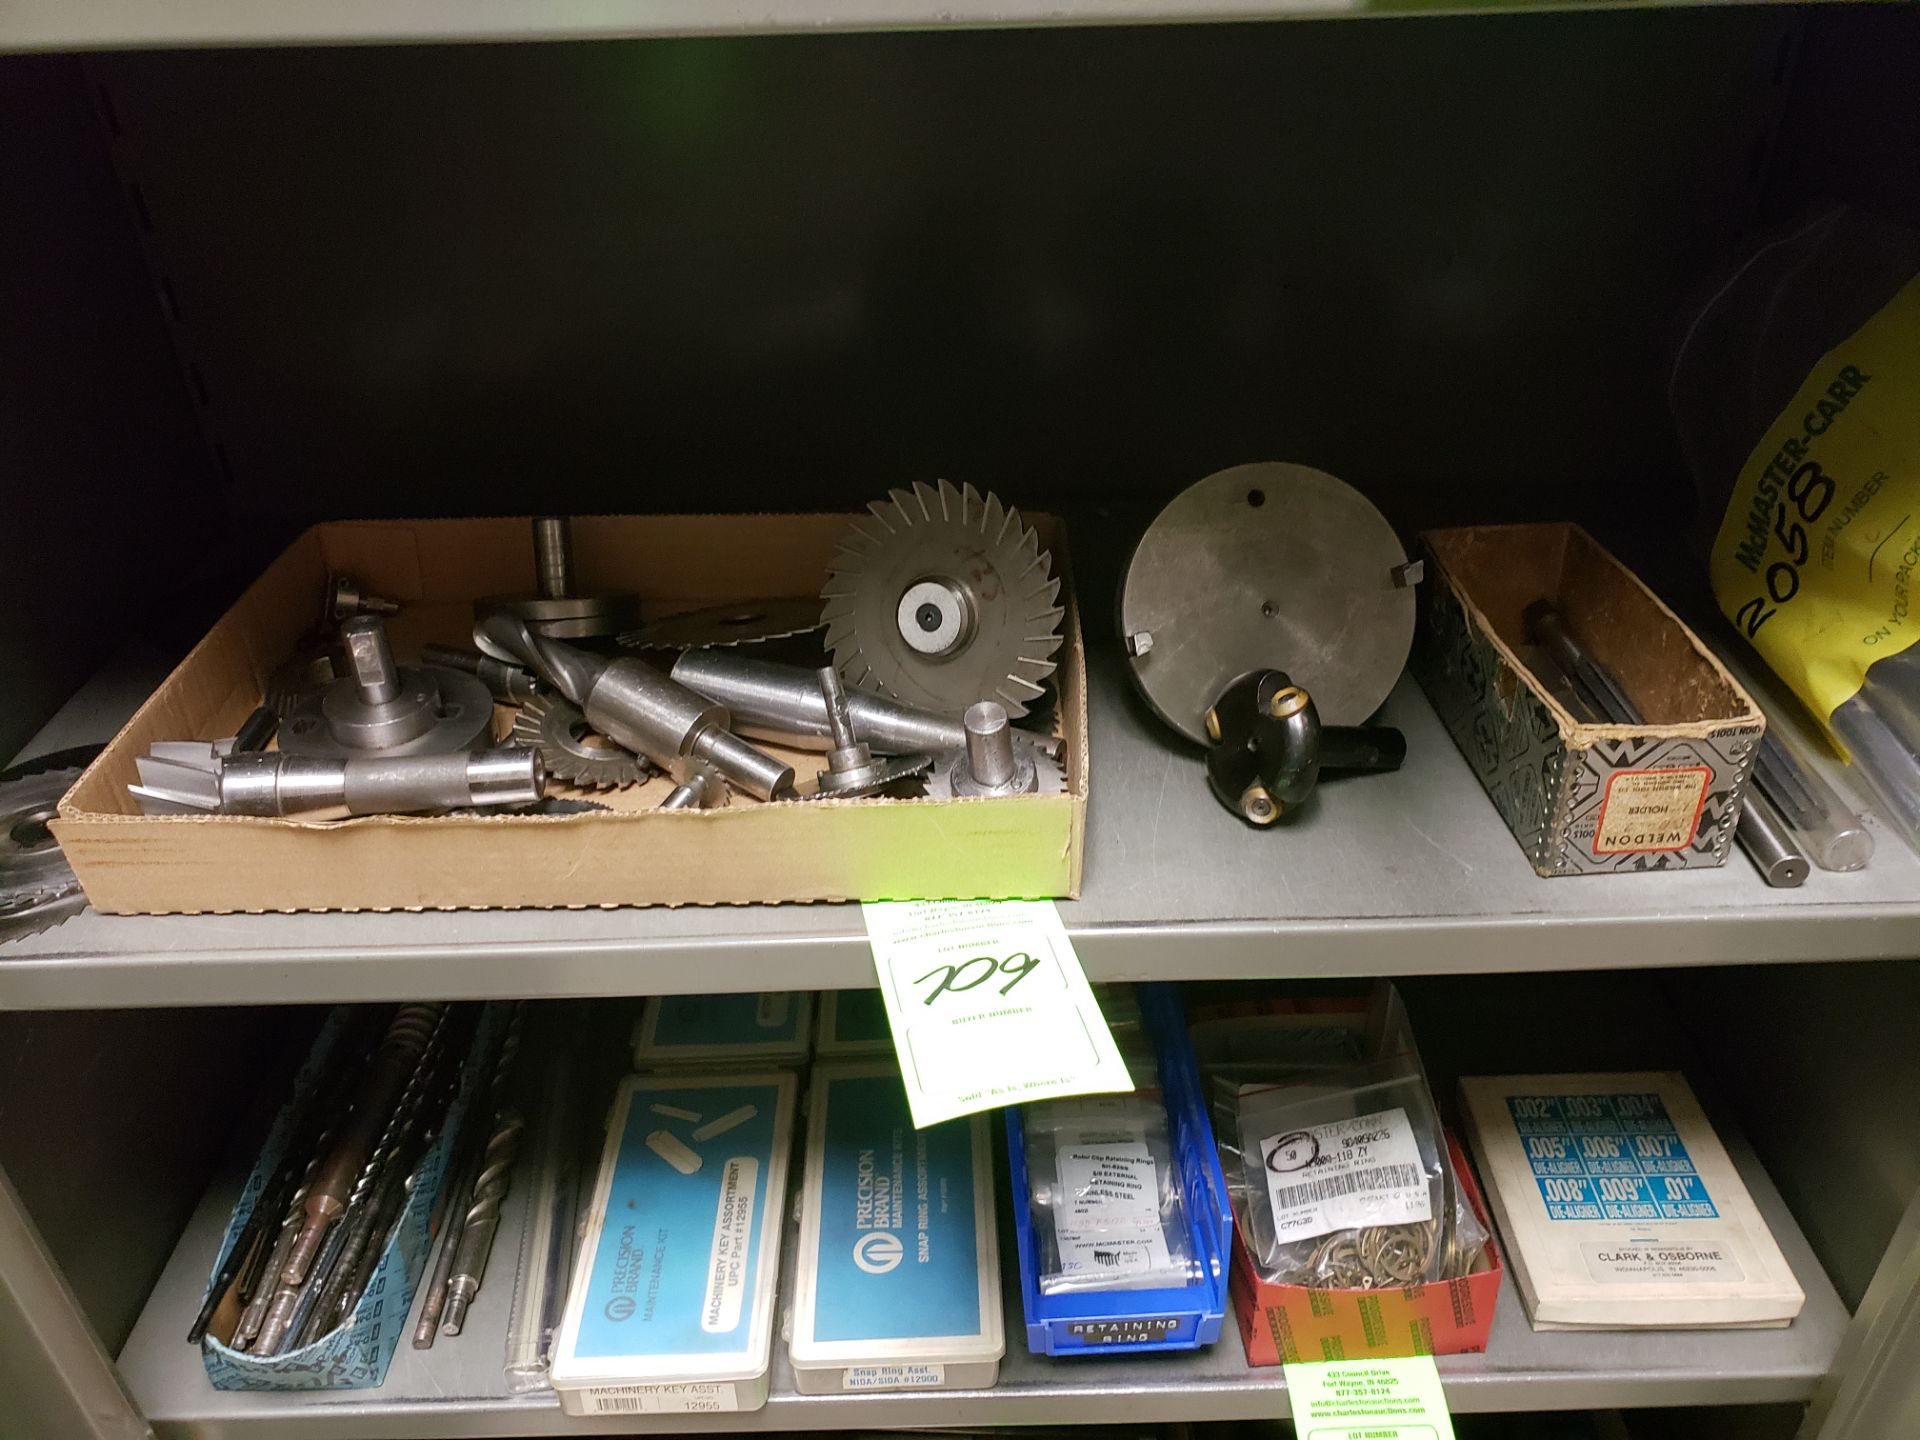 CONTENTS OF SHELF-CUTTING TOOLS